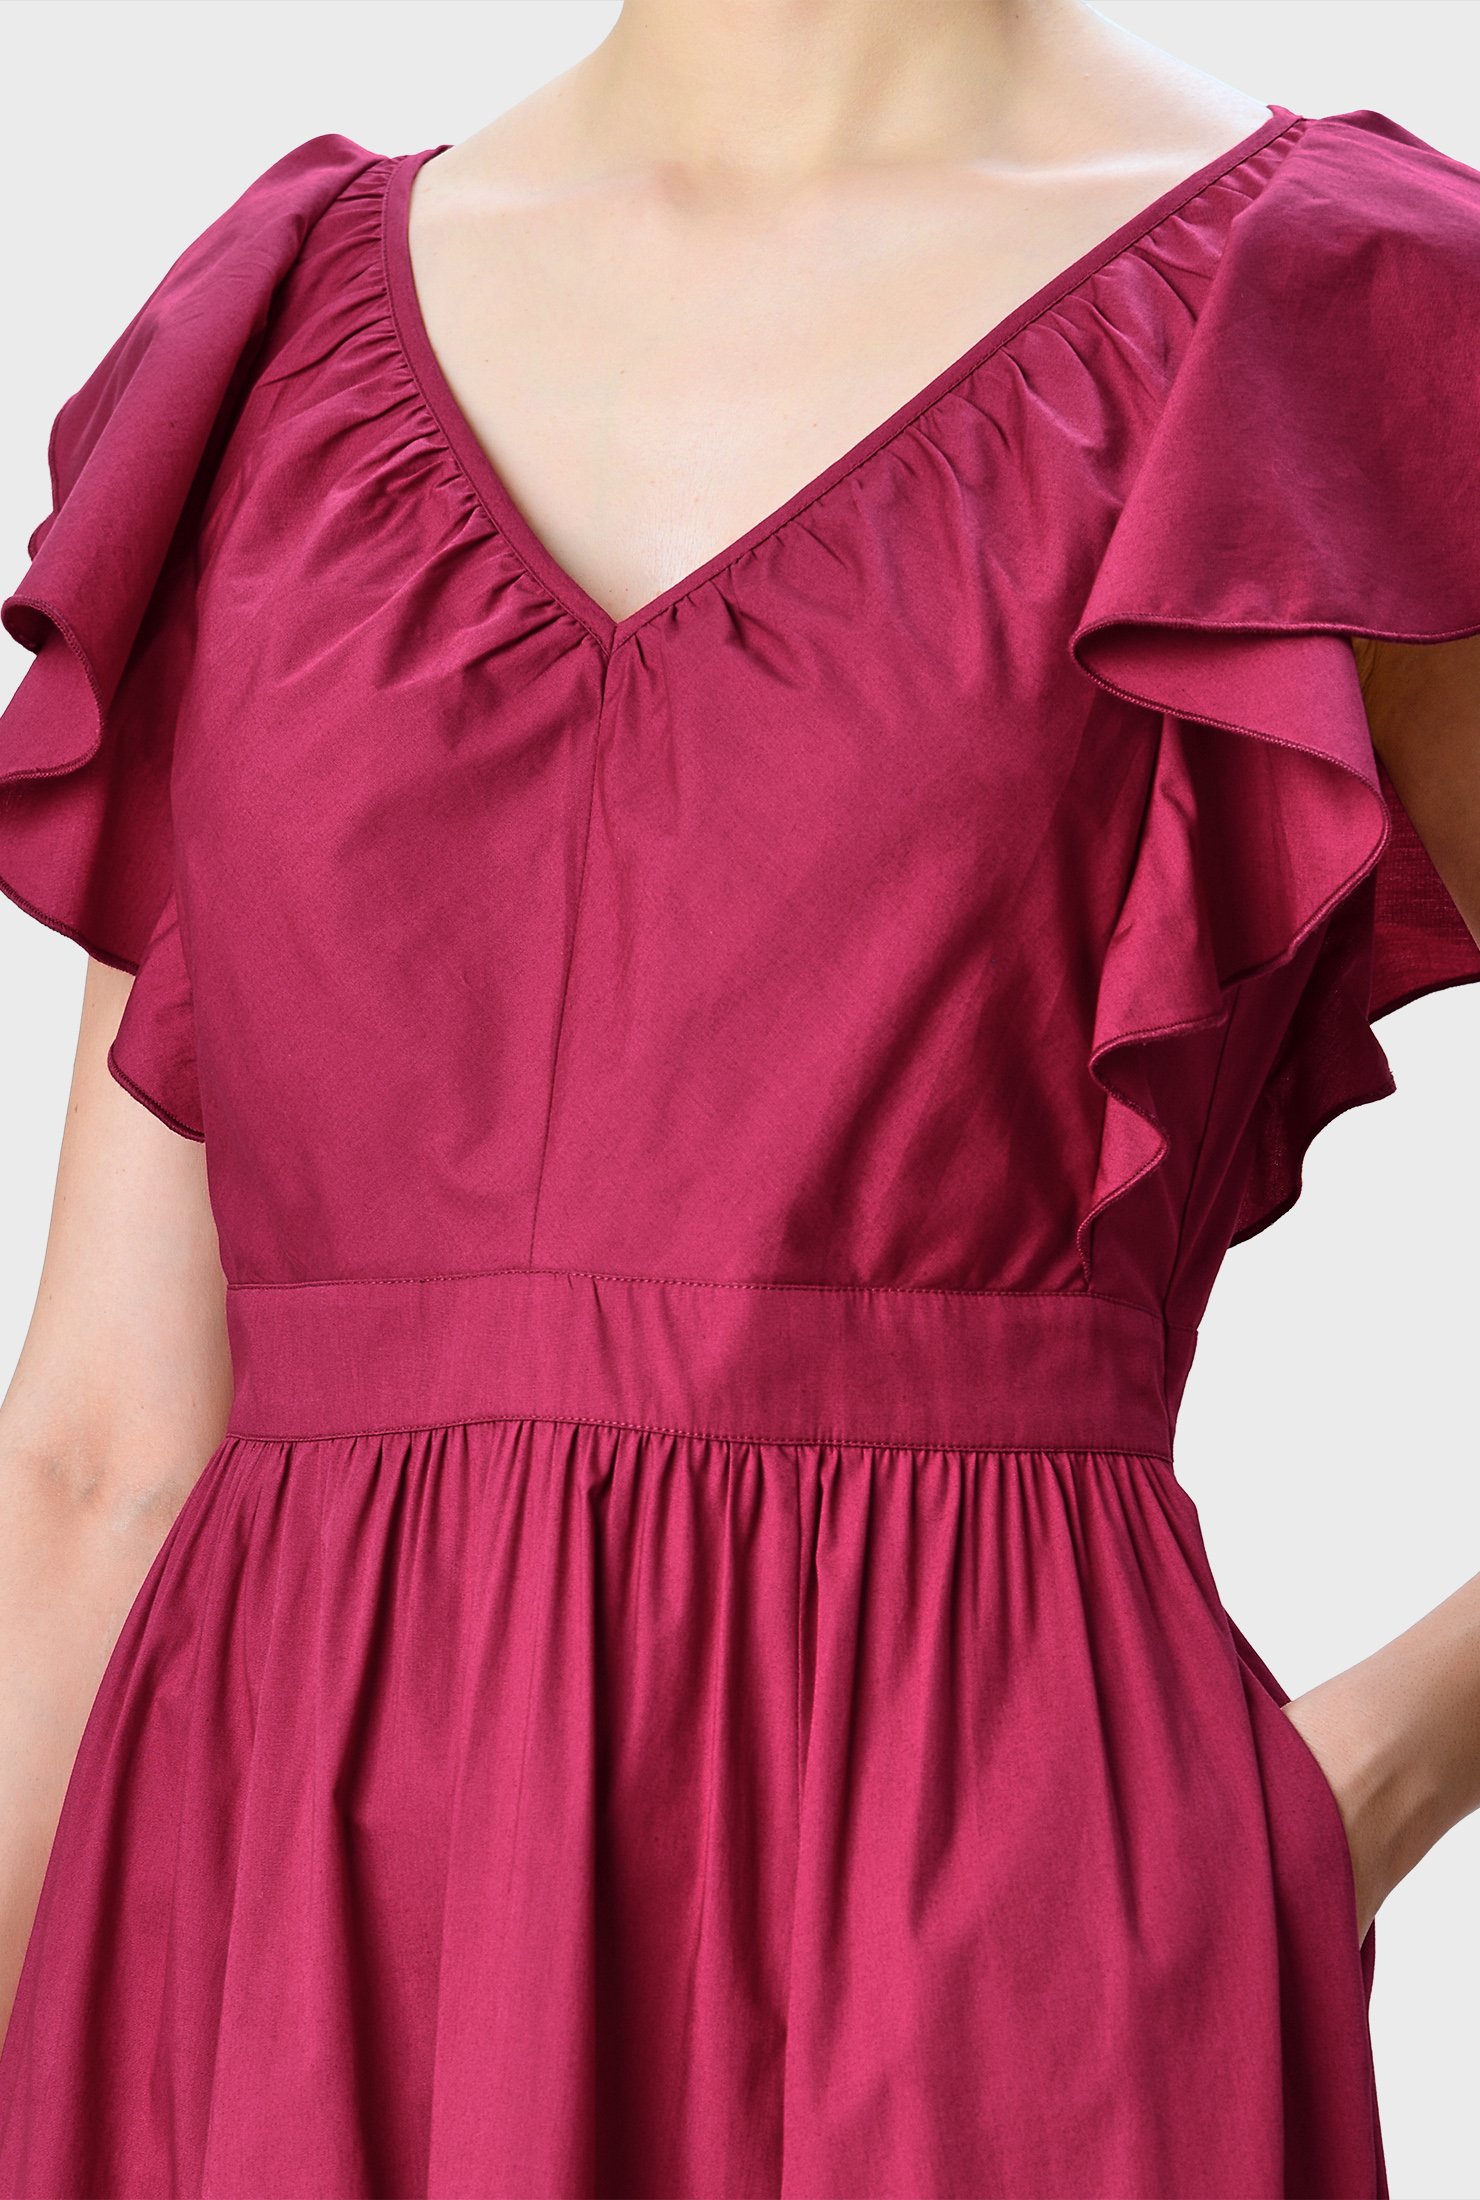 Lush ruffles spring from the shoulders down to the banded waist of our cotton poplin dress adding flutter and texture to the fit-and-flare silhouette. 